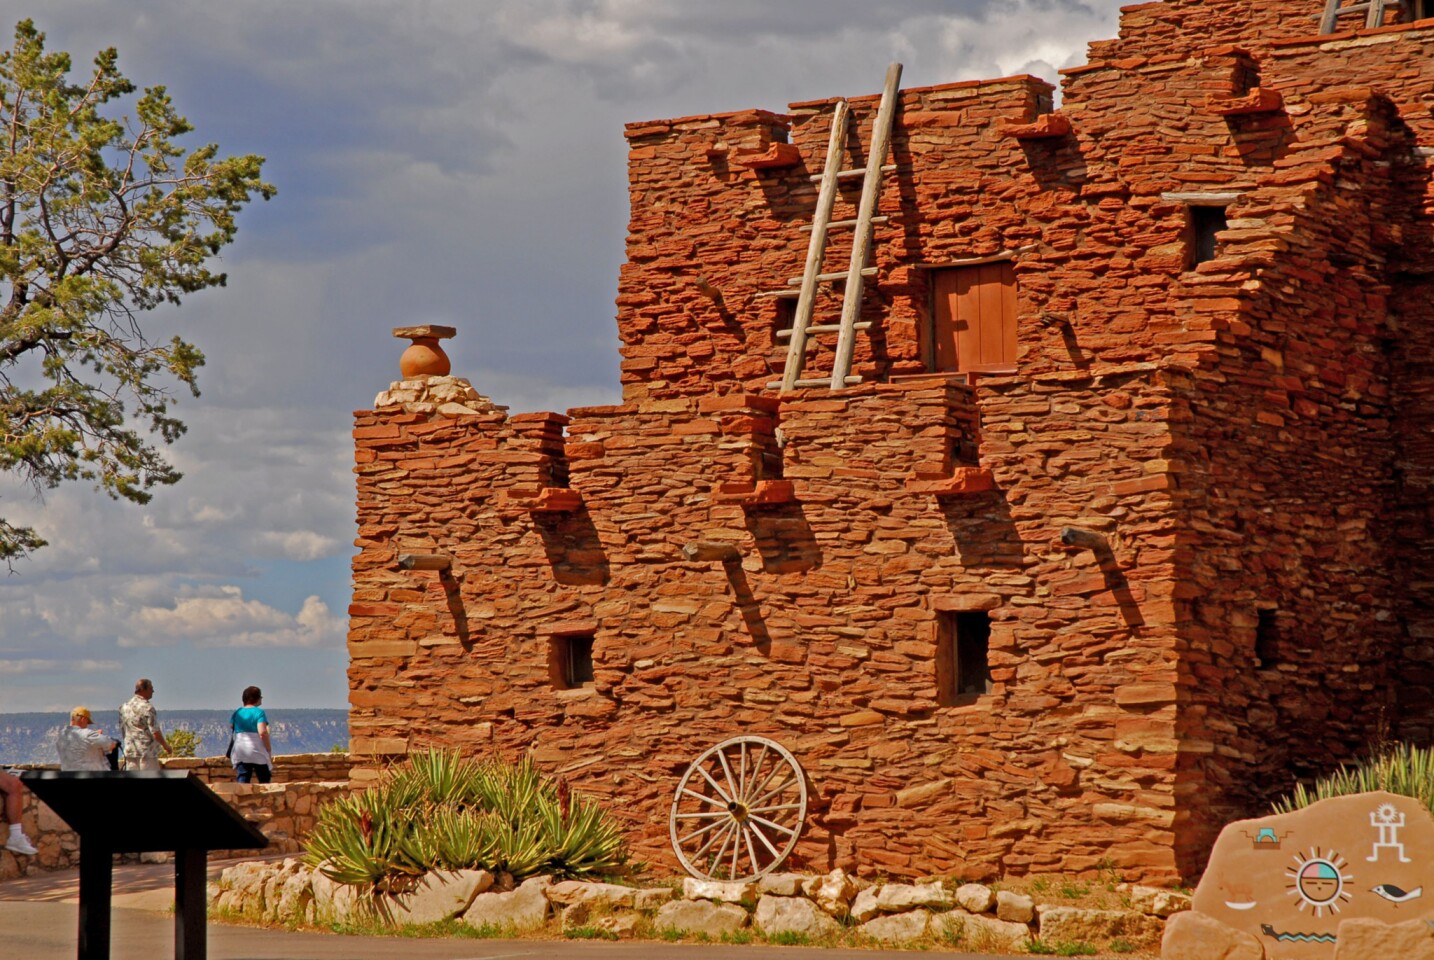 The century-old Hopi House sits opposite the El Tovar Hotel, on the South Rim of the Grand Canyon.